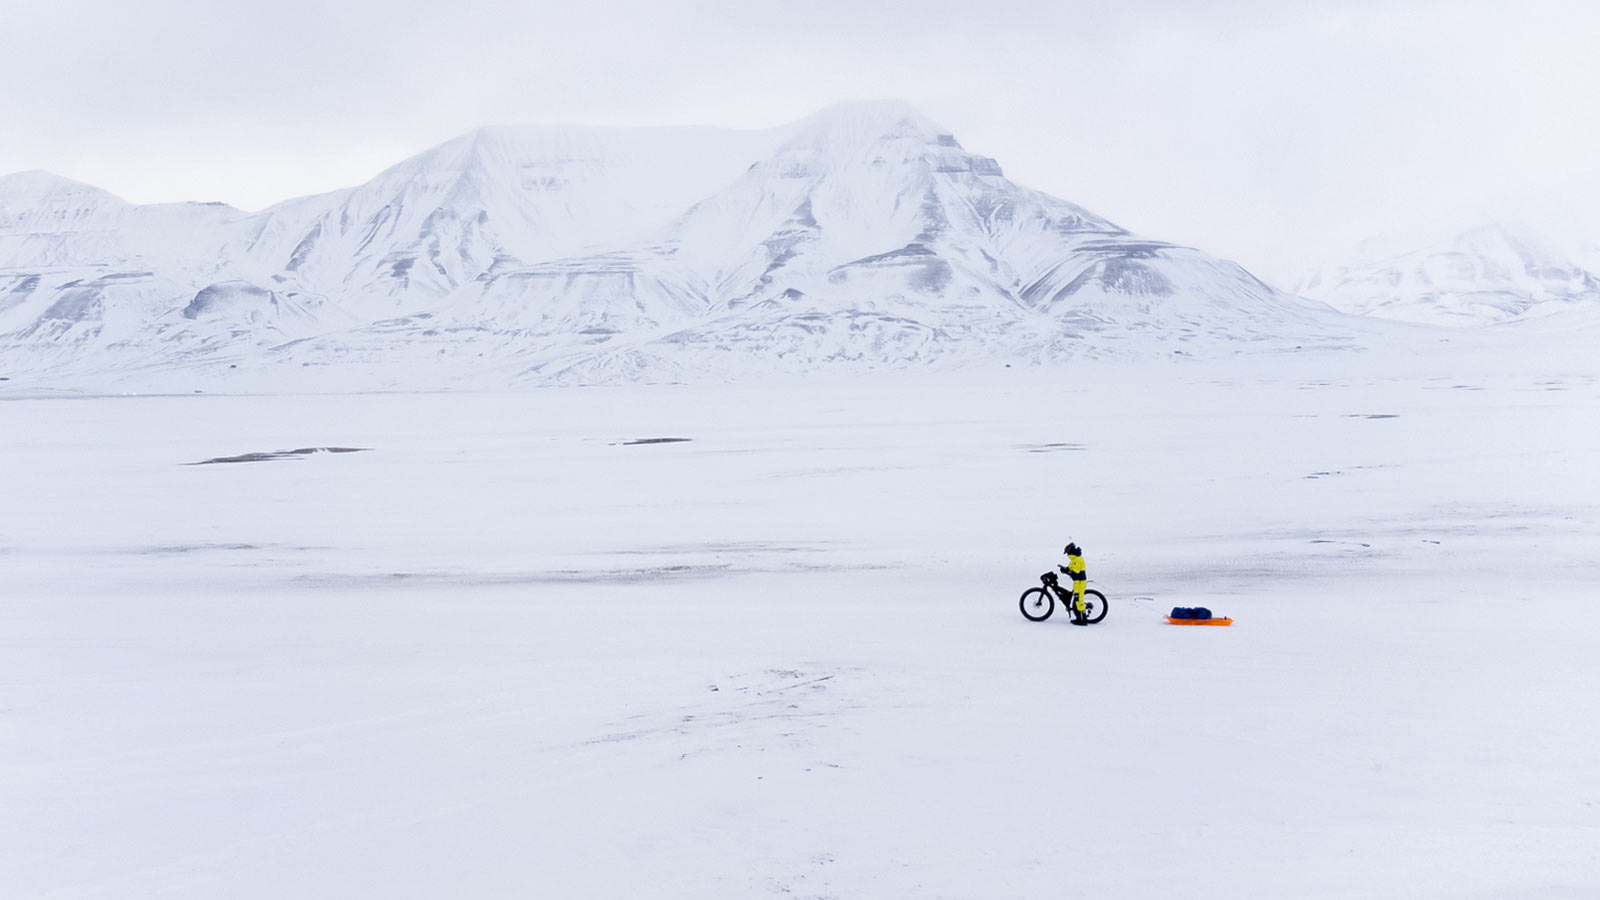 Antarctica Unlimited expedition of Omar di Felice on prototype Wilier Triestina fat bike, snow riding